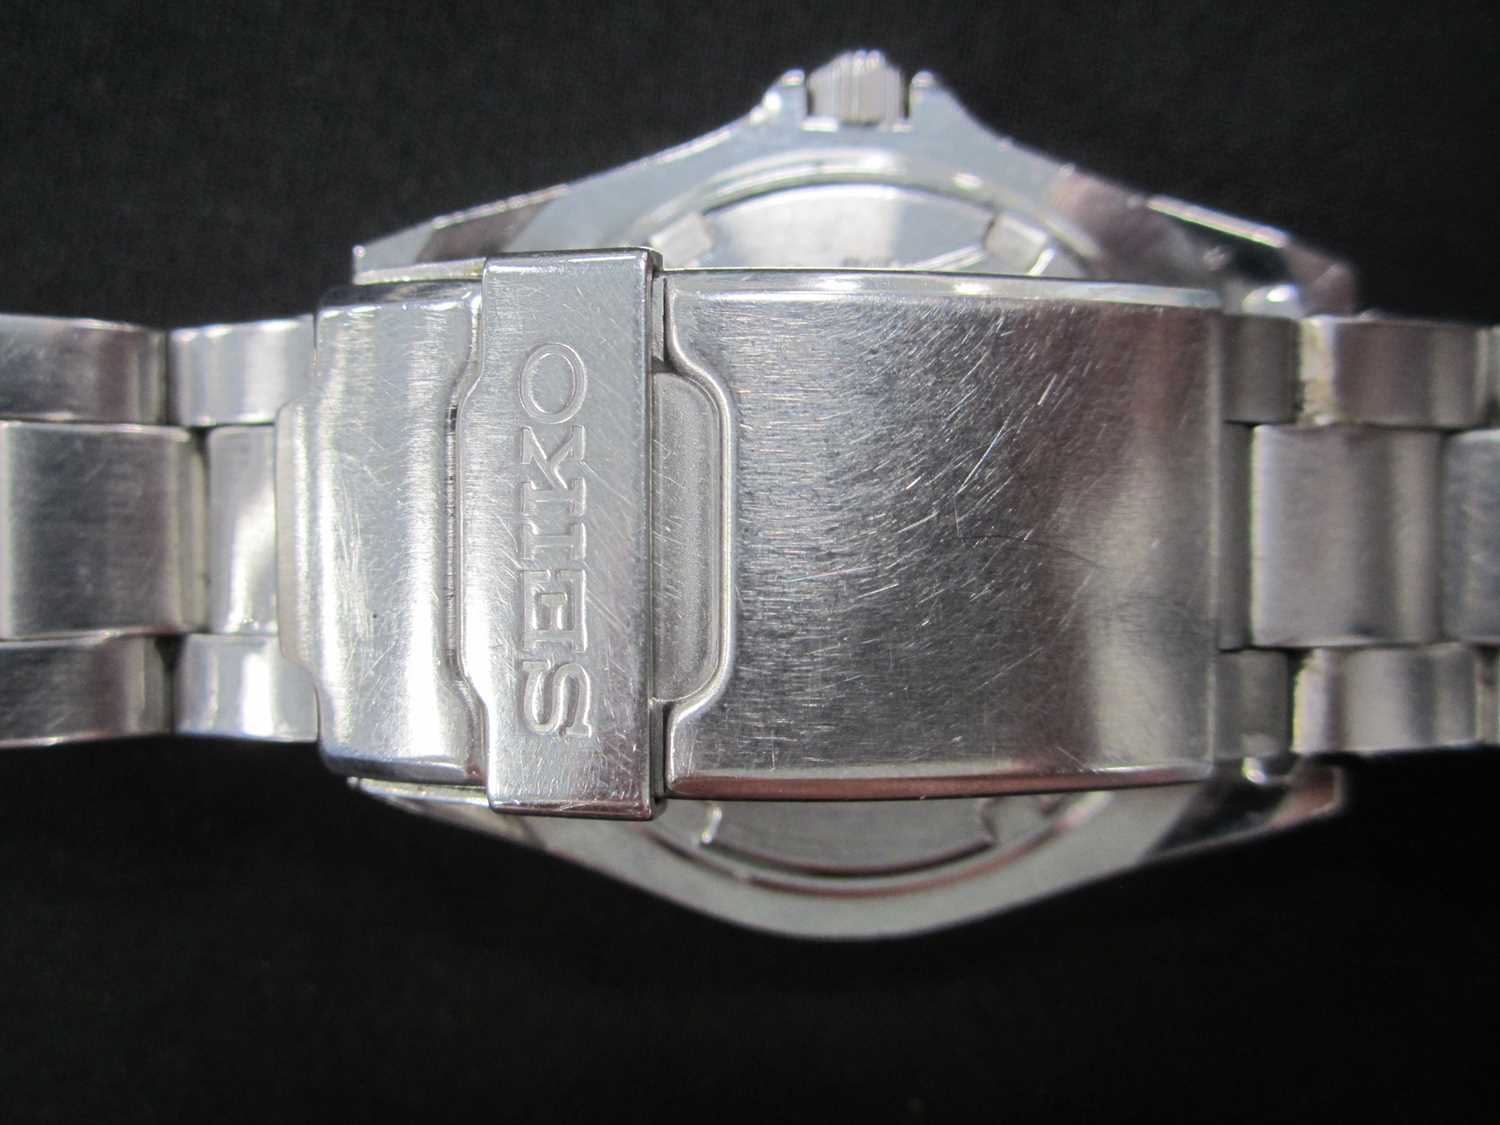 Seiko: A gentleman's stainless steel SQ diver's watch - Image 6 of 6